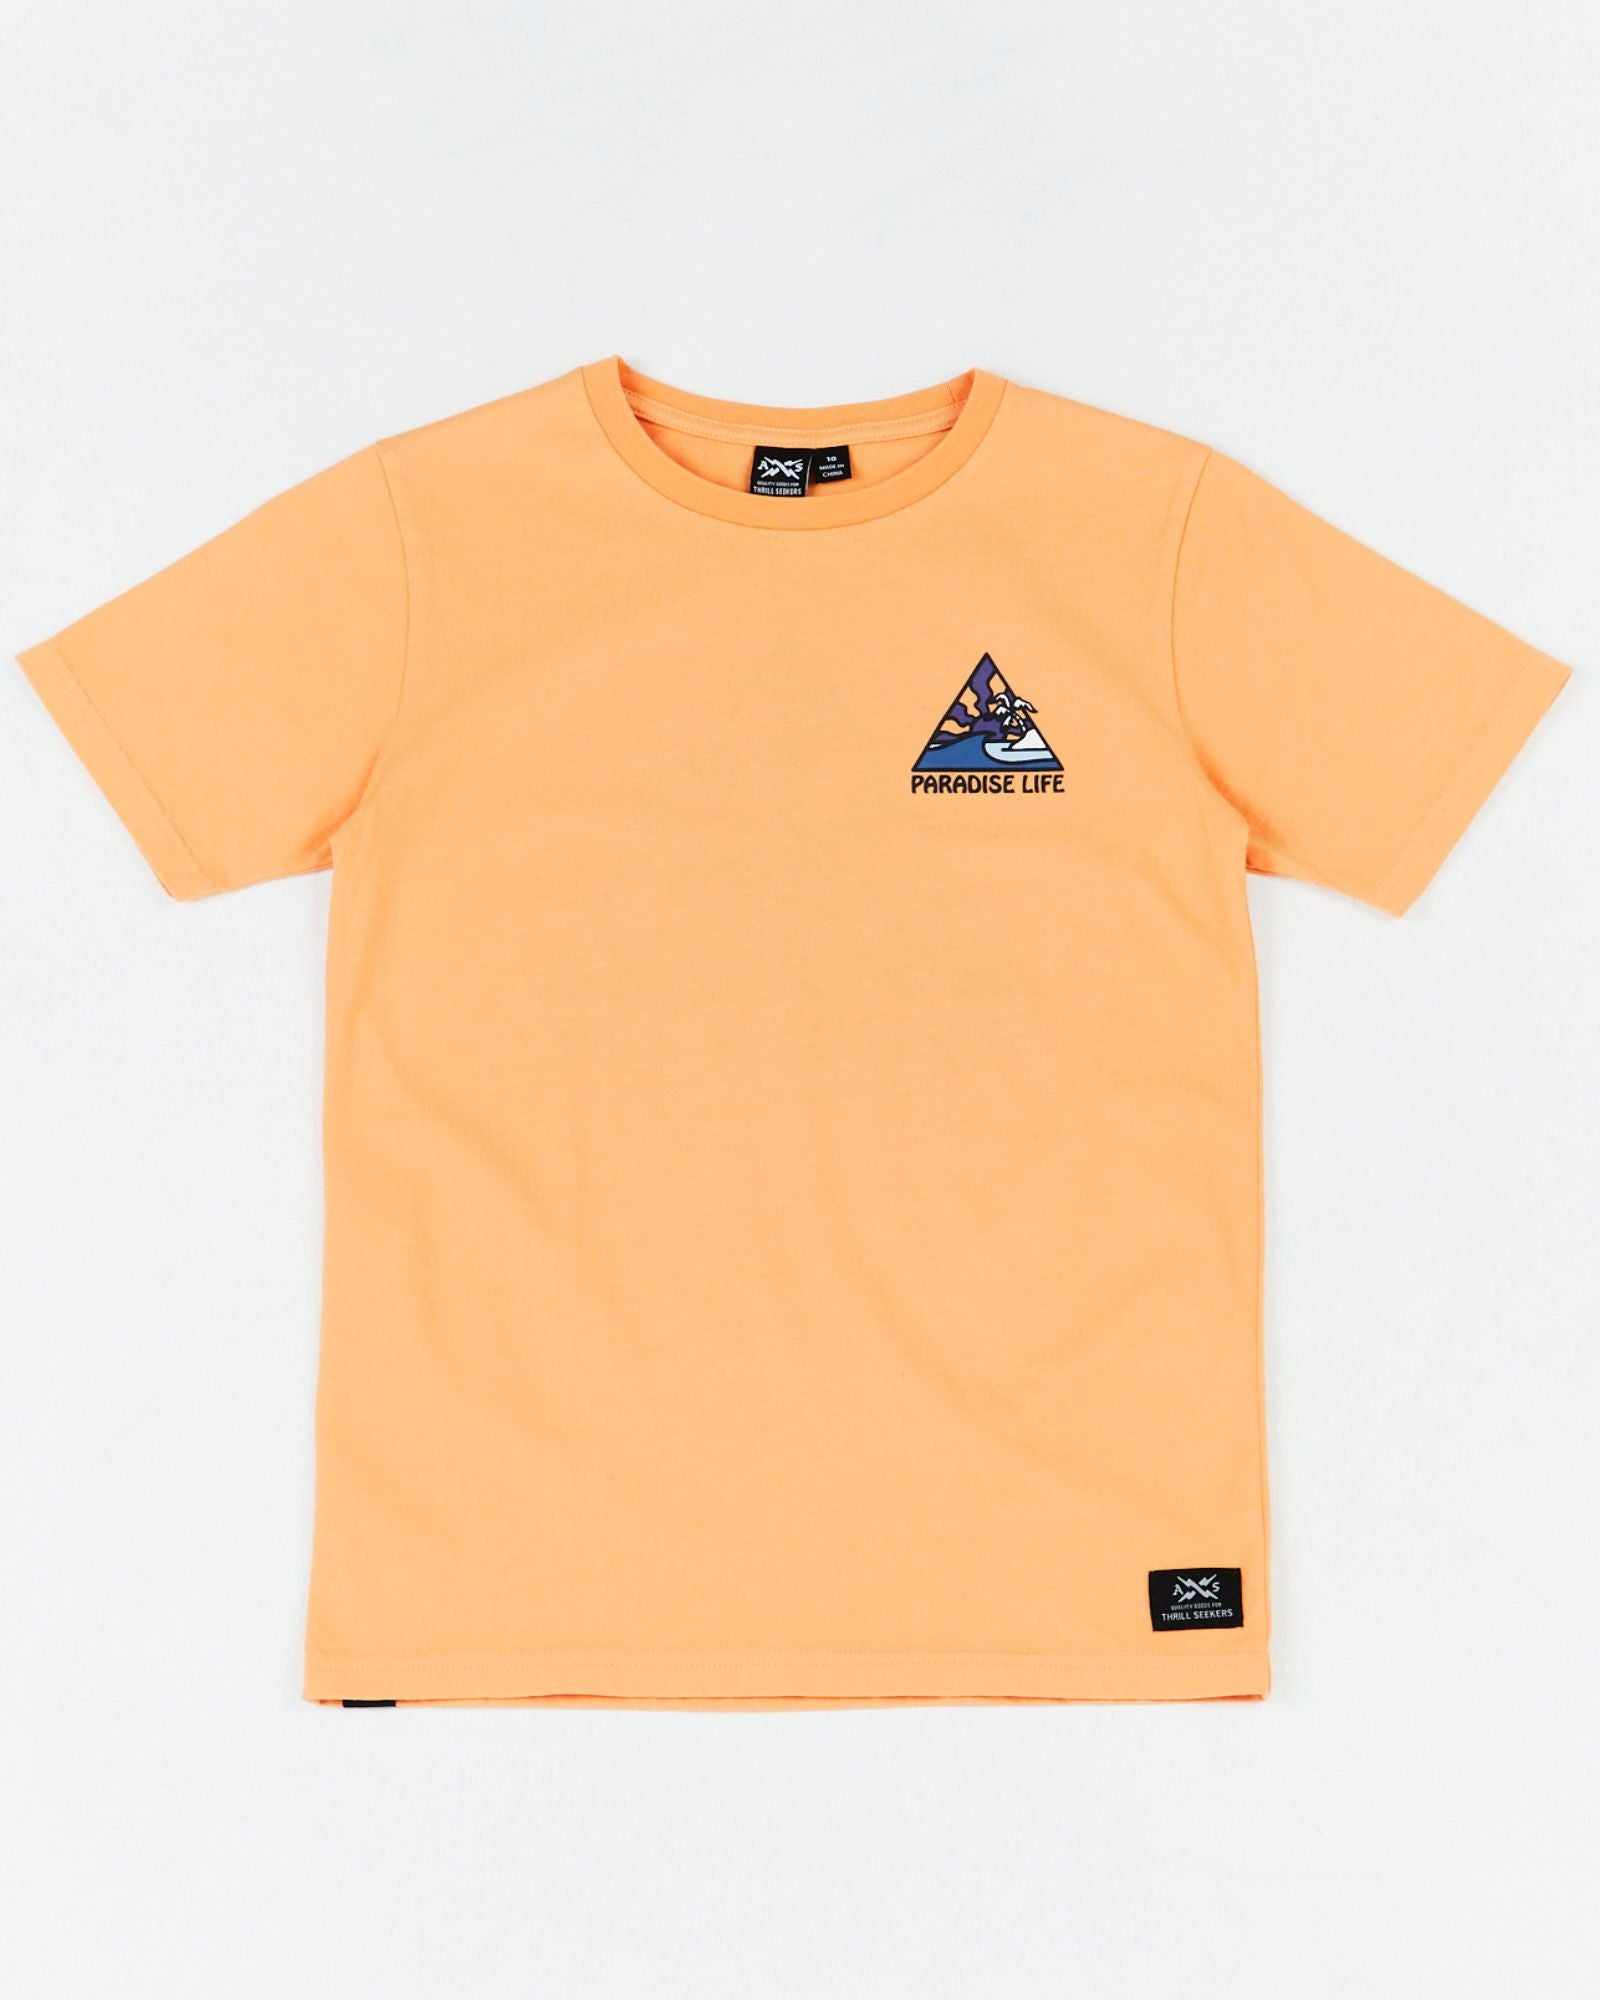  Alphabet Soup's Kids Thruster Tee for boys aged 2-7. Crafted from 100% Cotton Jersey. A melon pigment dye tee, regular fit, straight hemline, short sleeves, ribbed crew neckline, and a retro surf “Paradise Life” print to chest and back.